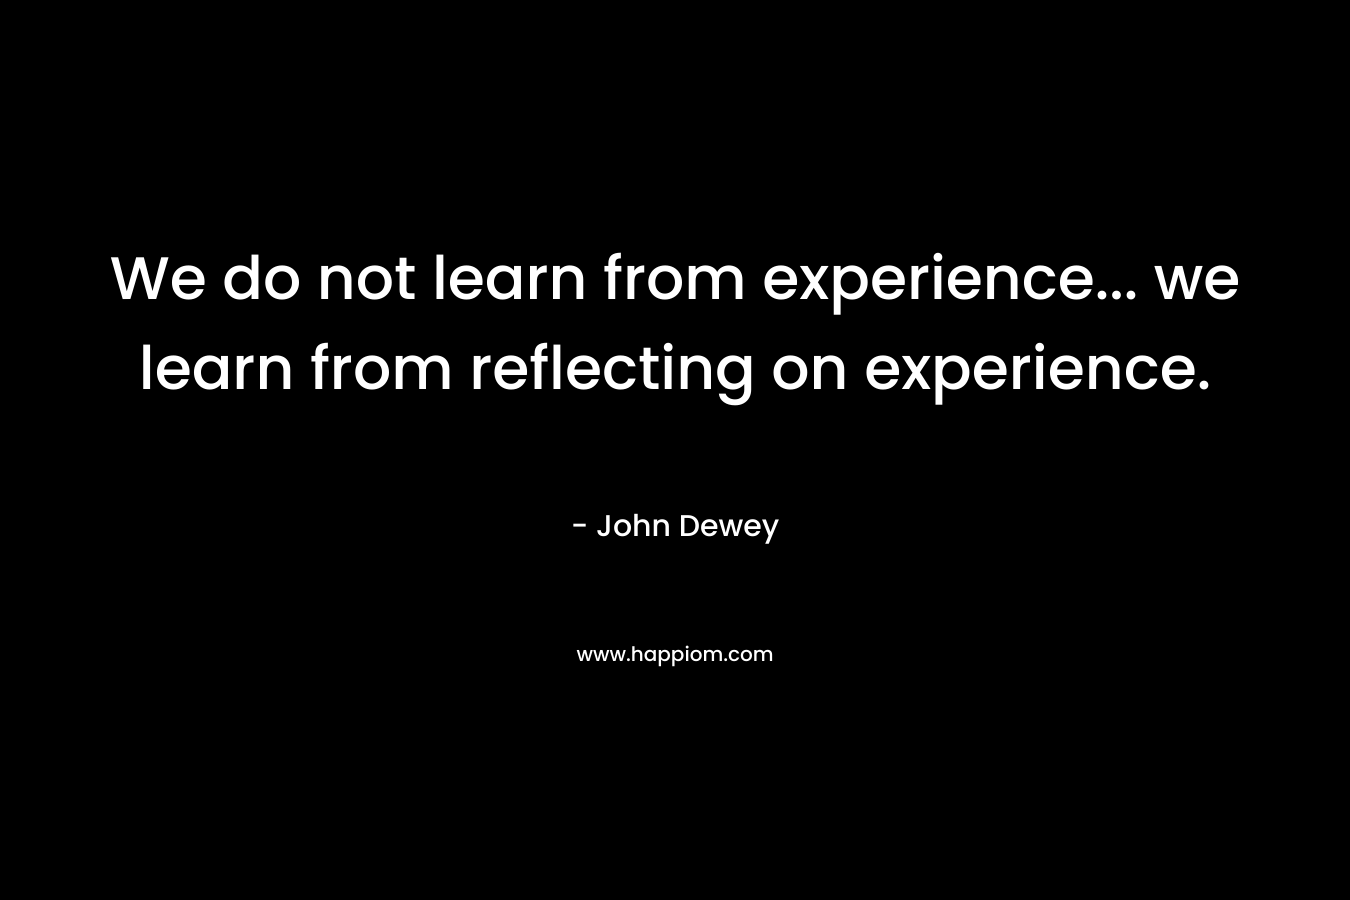 We do not learn from experience... we learn from reflecting on experience.